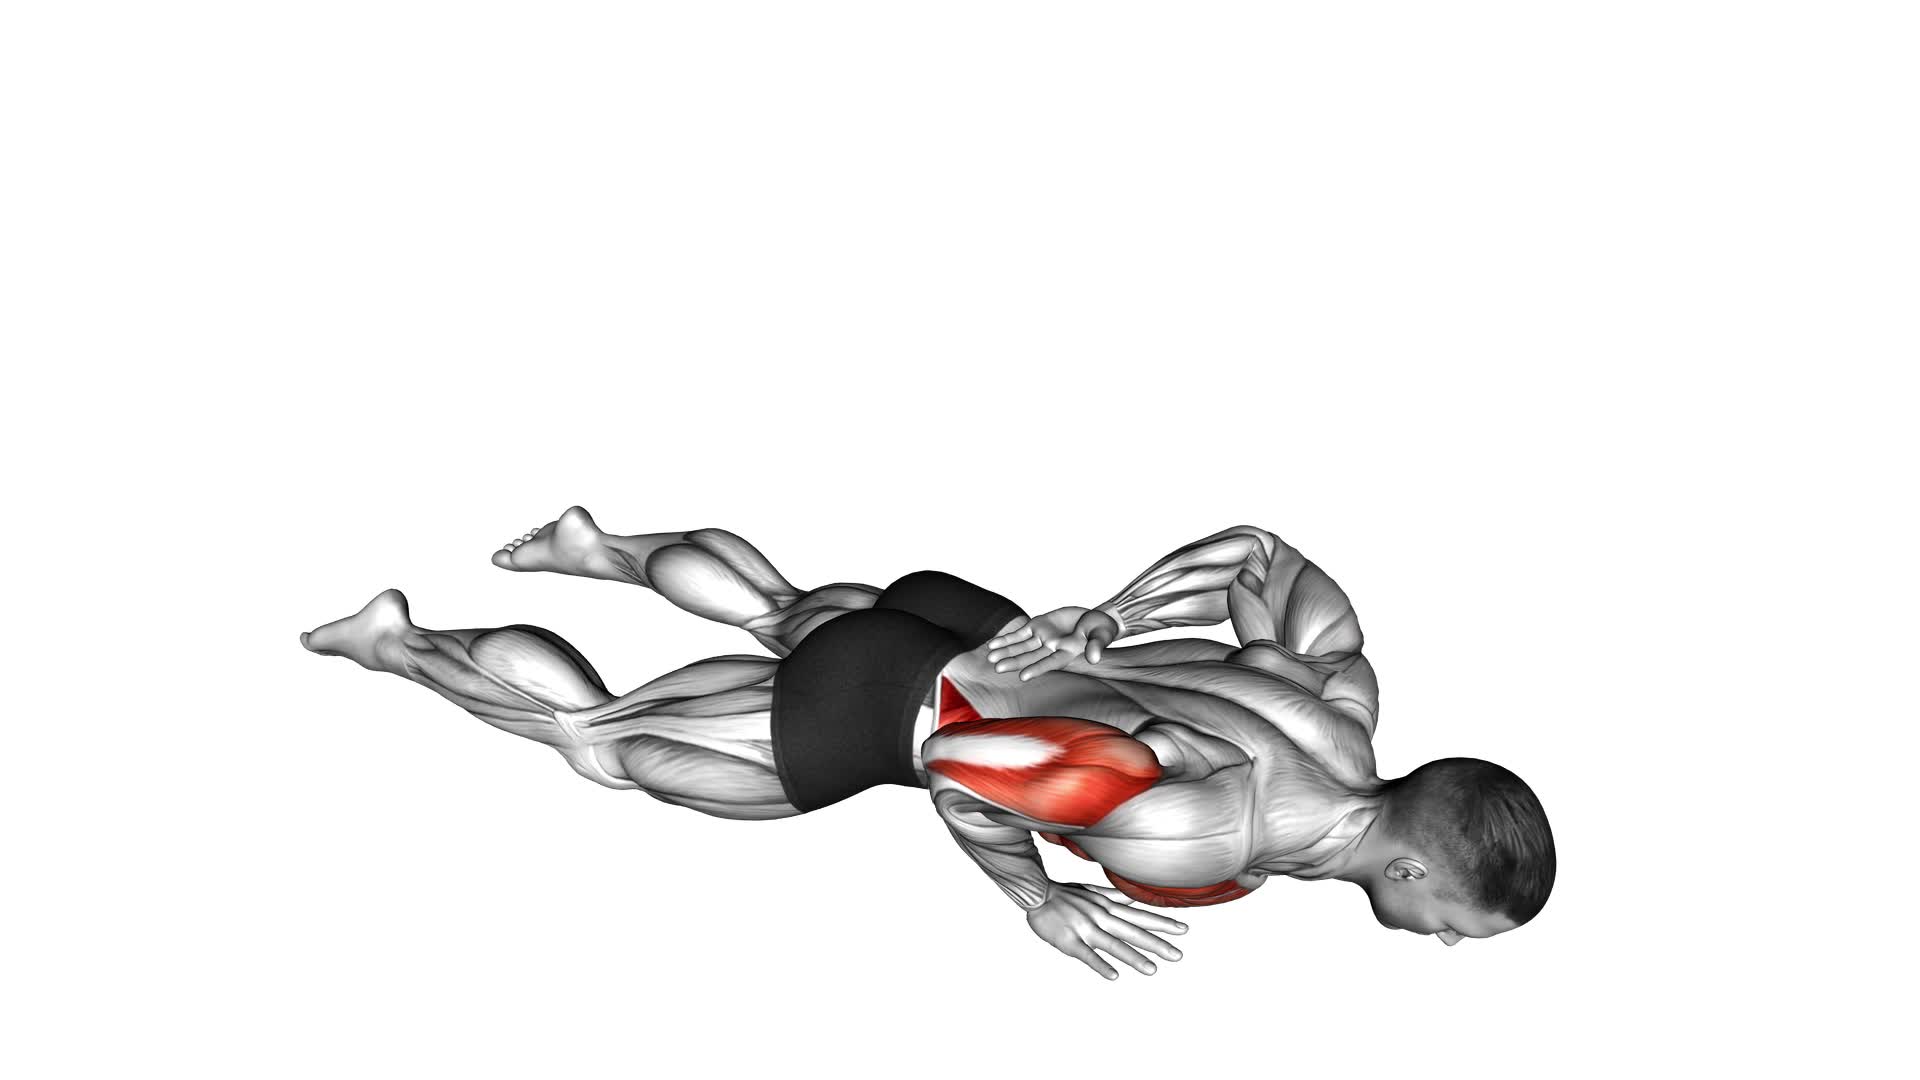 Single Arm Push-Up (On Knees) - Video Exercise Guide & Tips